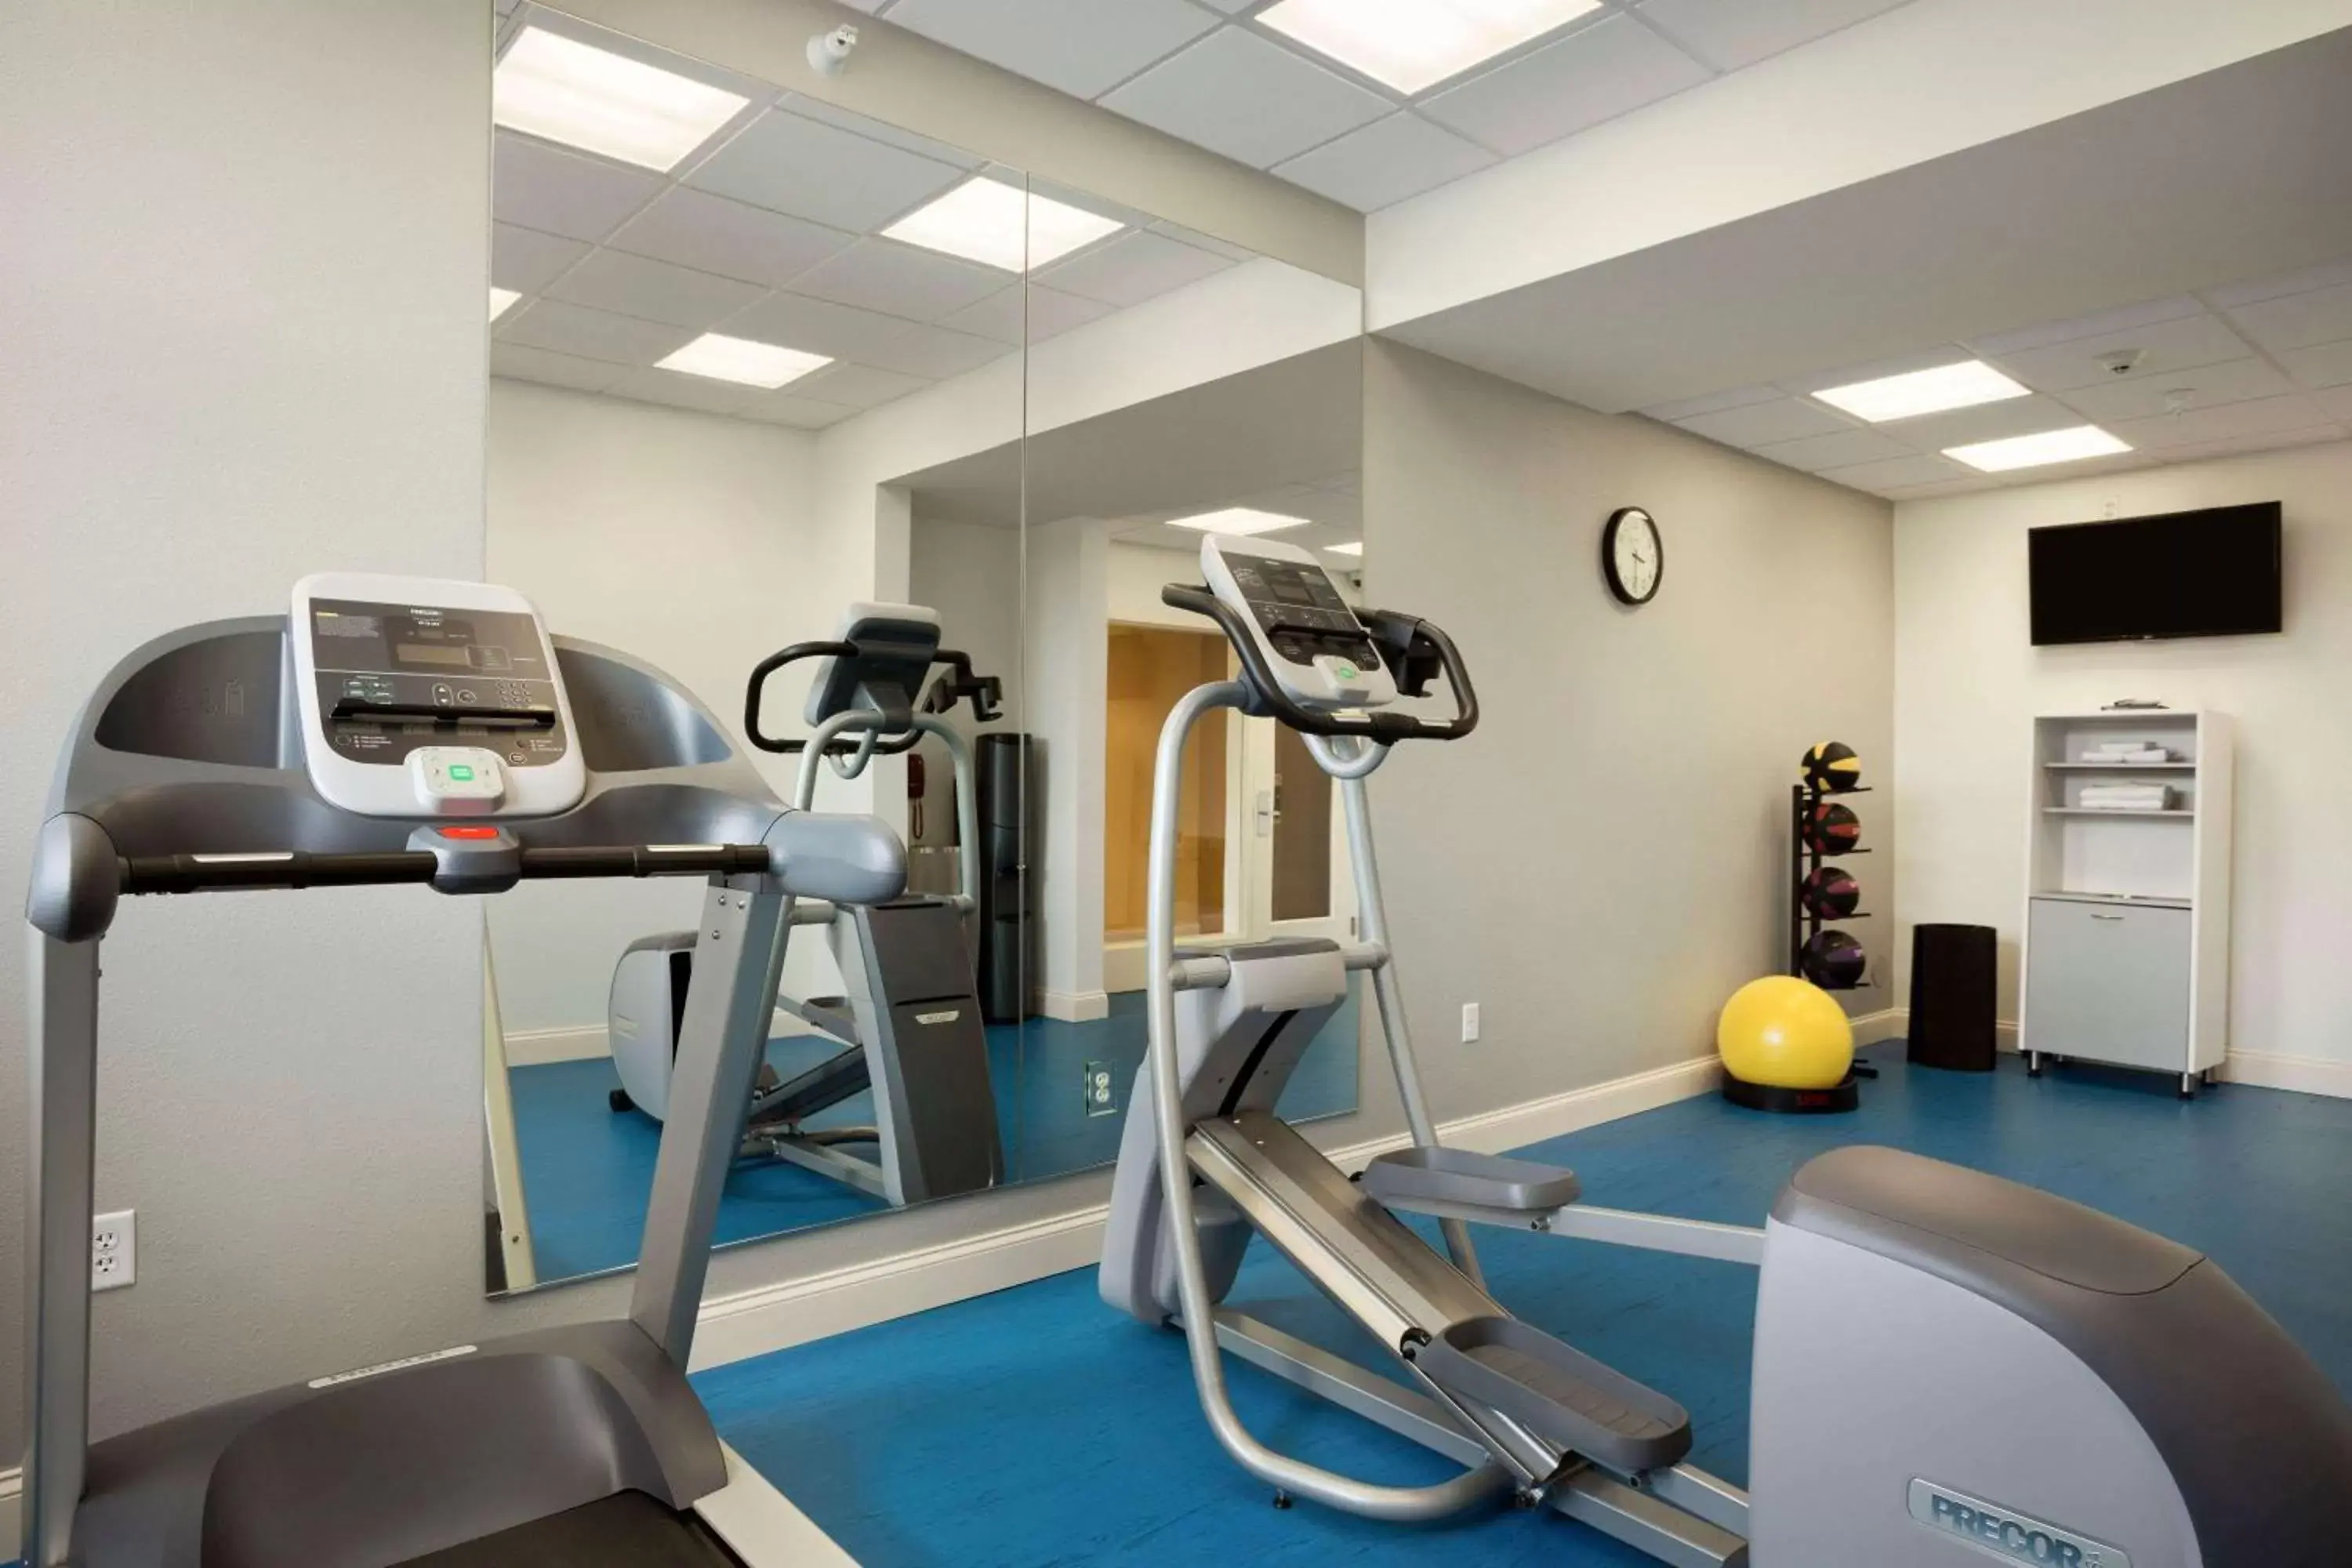 Fitness centre/facilities, Fitness Center/Facilities in Days Inn & Suites by Wyndham Caldwell